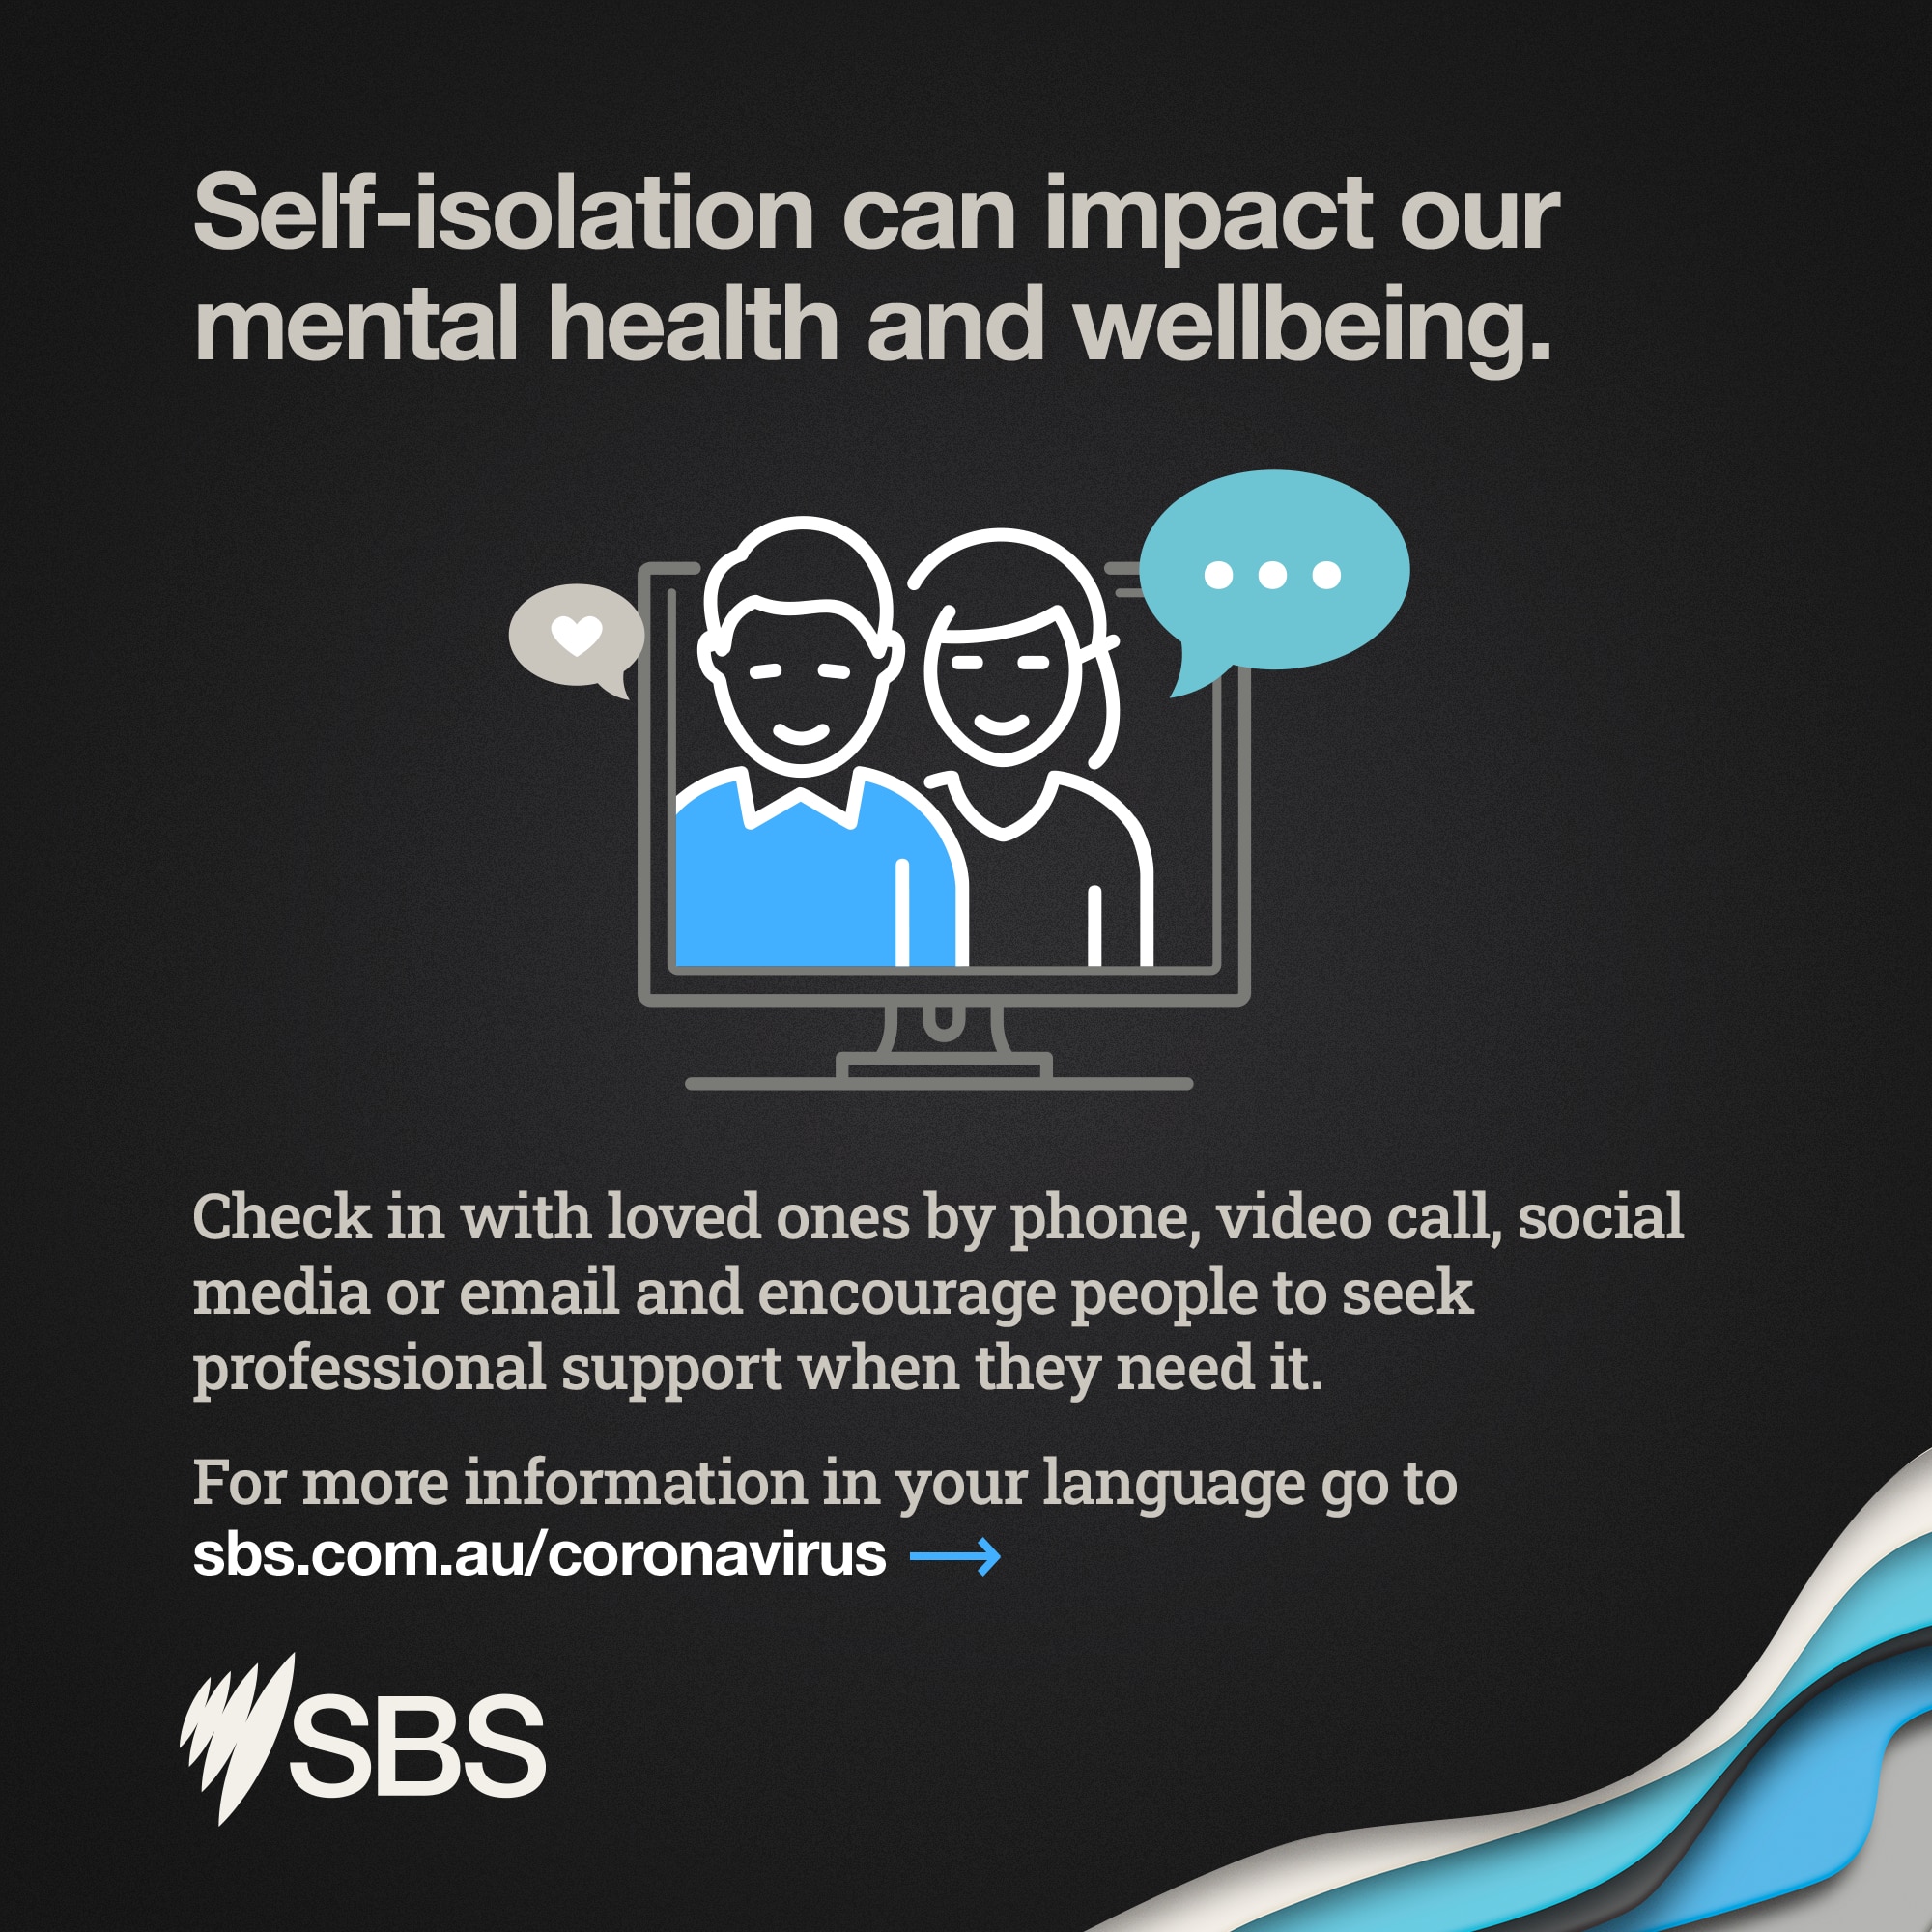 Mental health during self-isolation